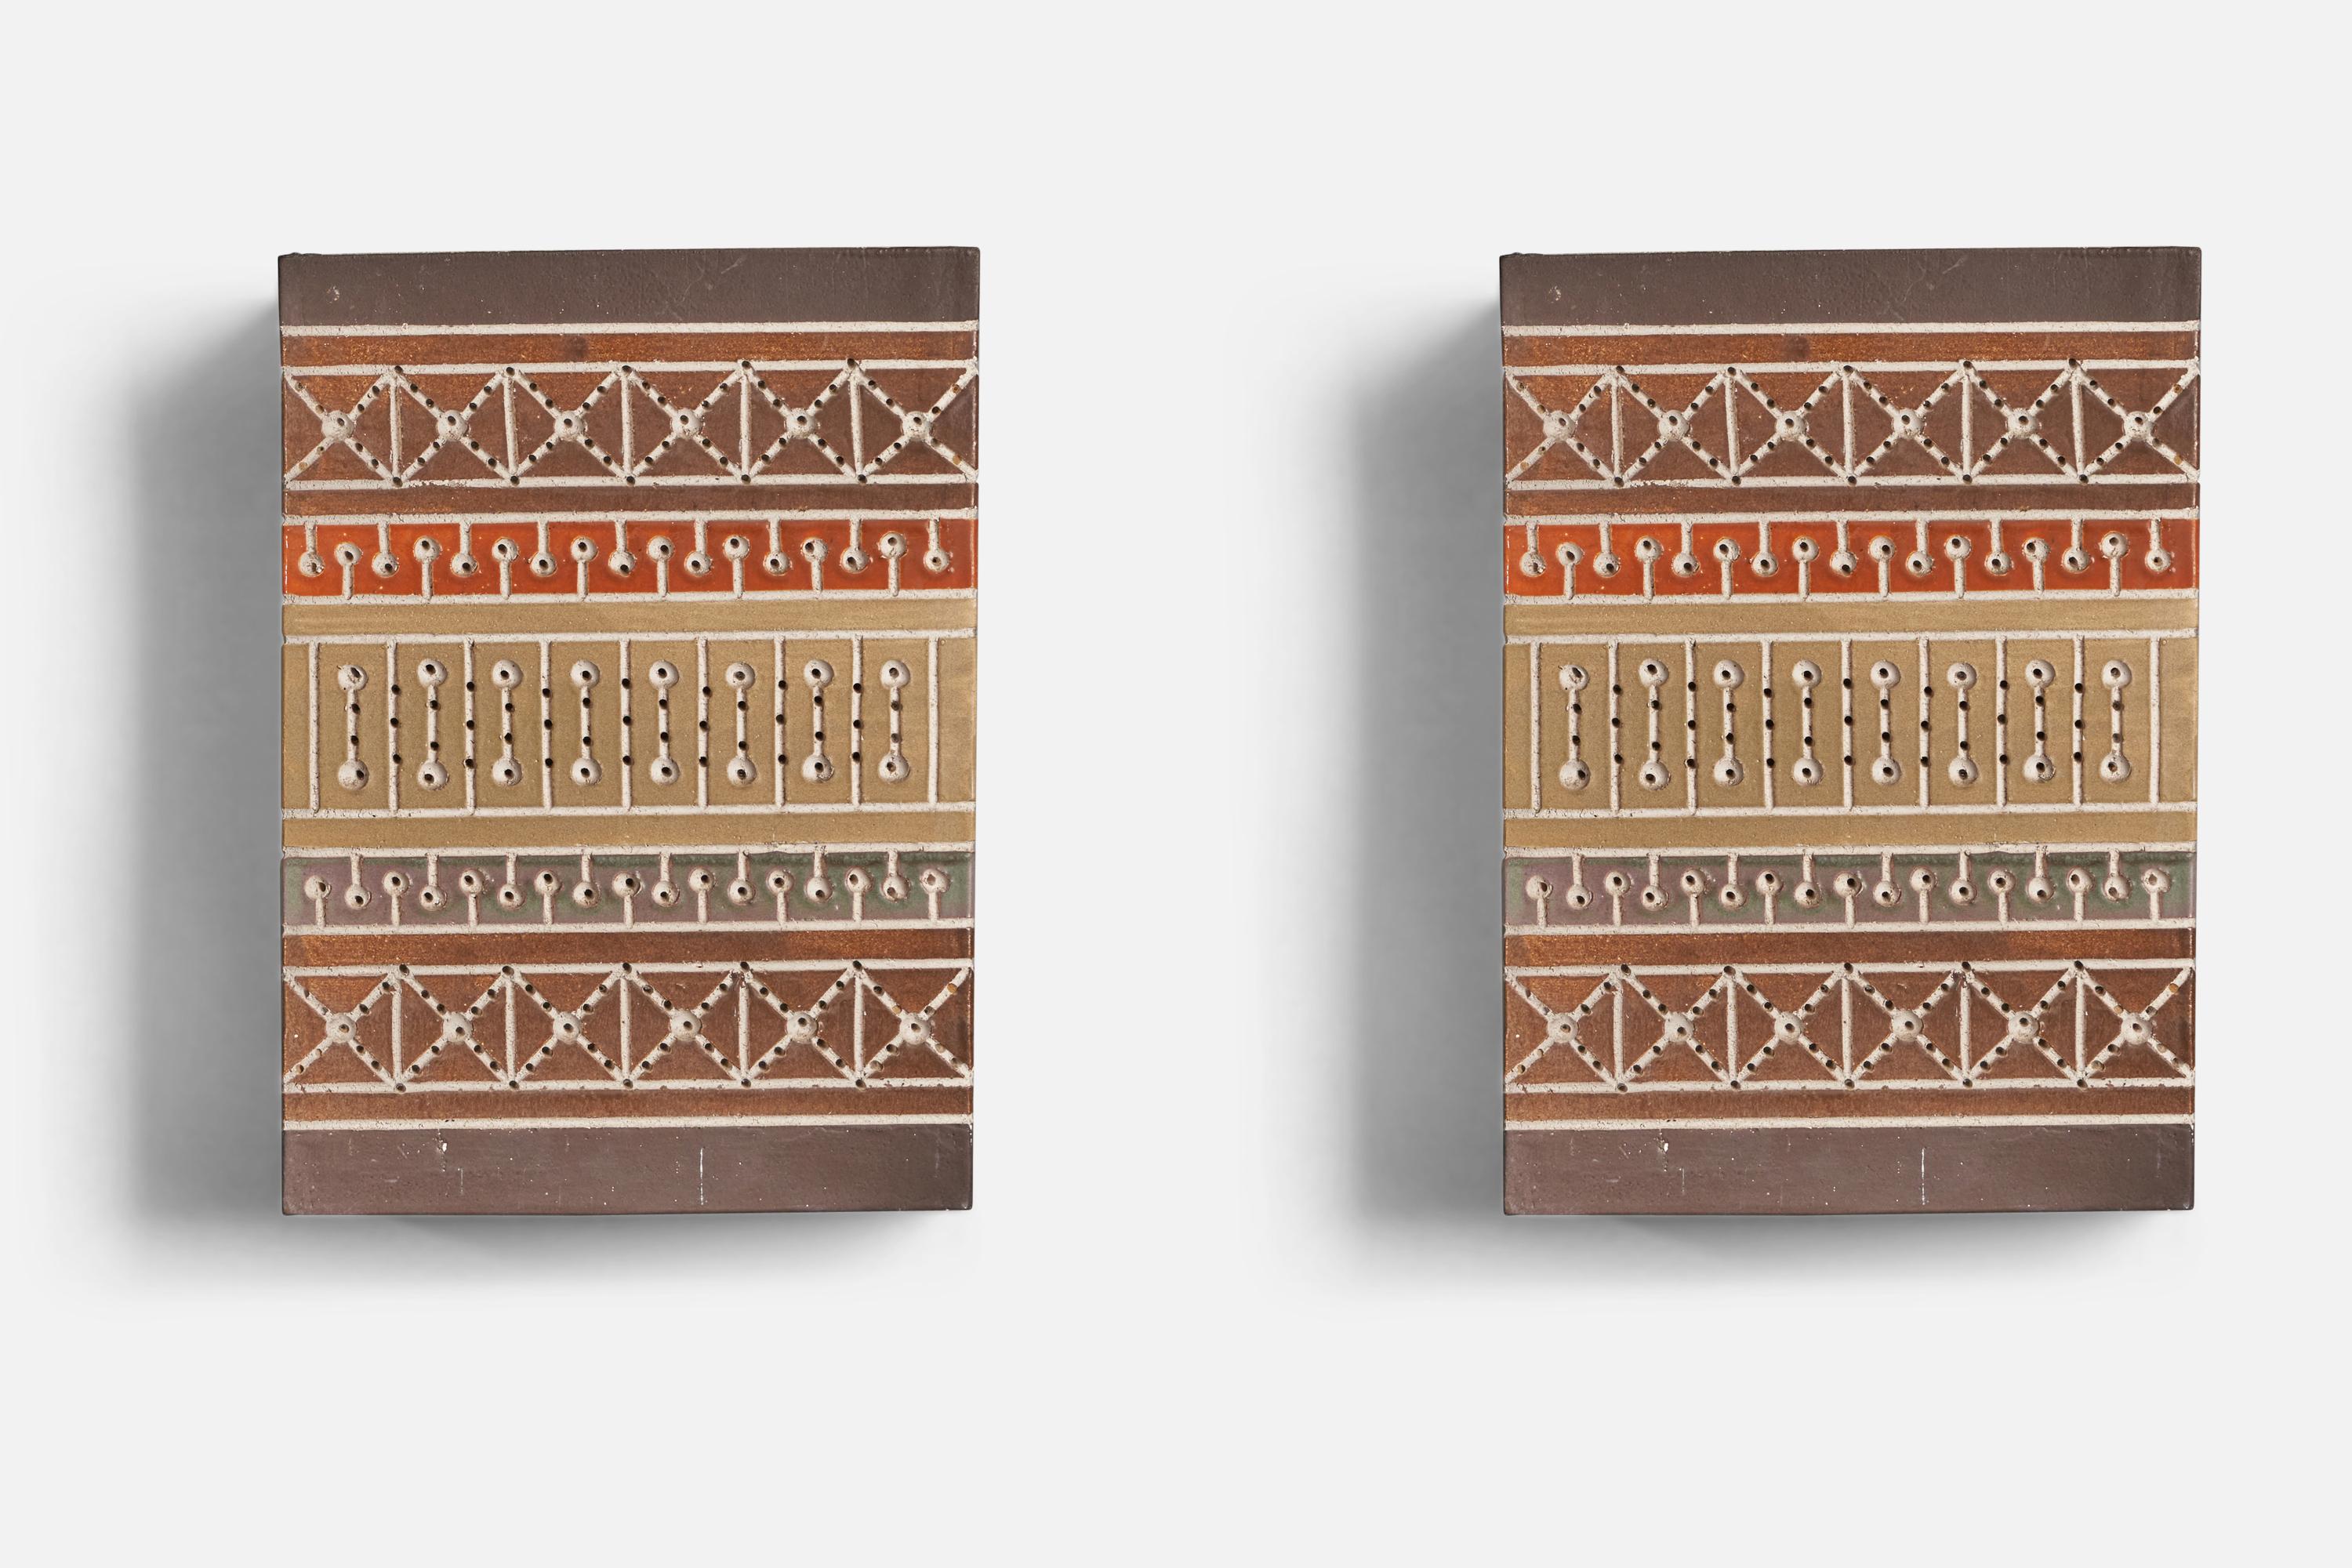 A pair of sizeable hand-painted ceramic wall lights or sconce covers designed and produced by Martha and Beaumont Mood, San Antonio, Texas, USA, 1970s. 

Overall Dimensions (inches): 15.25